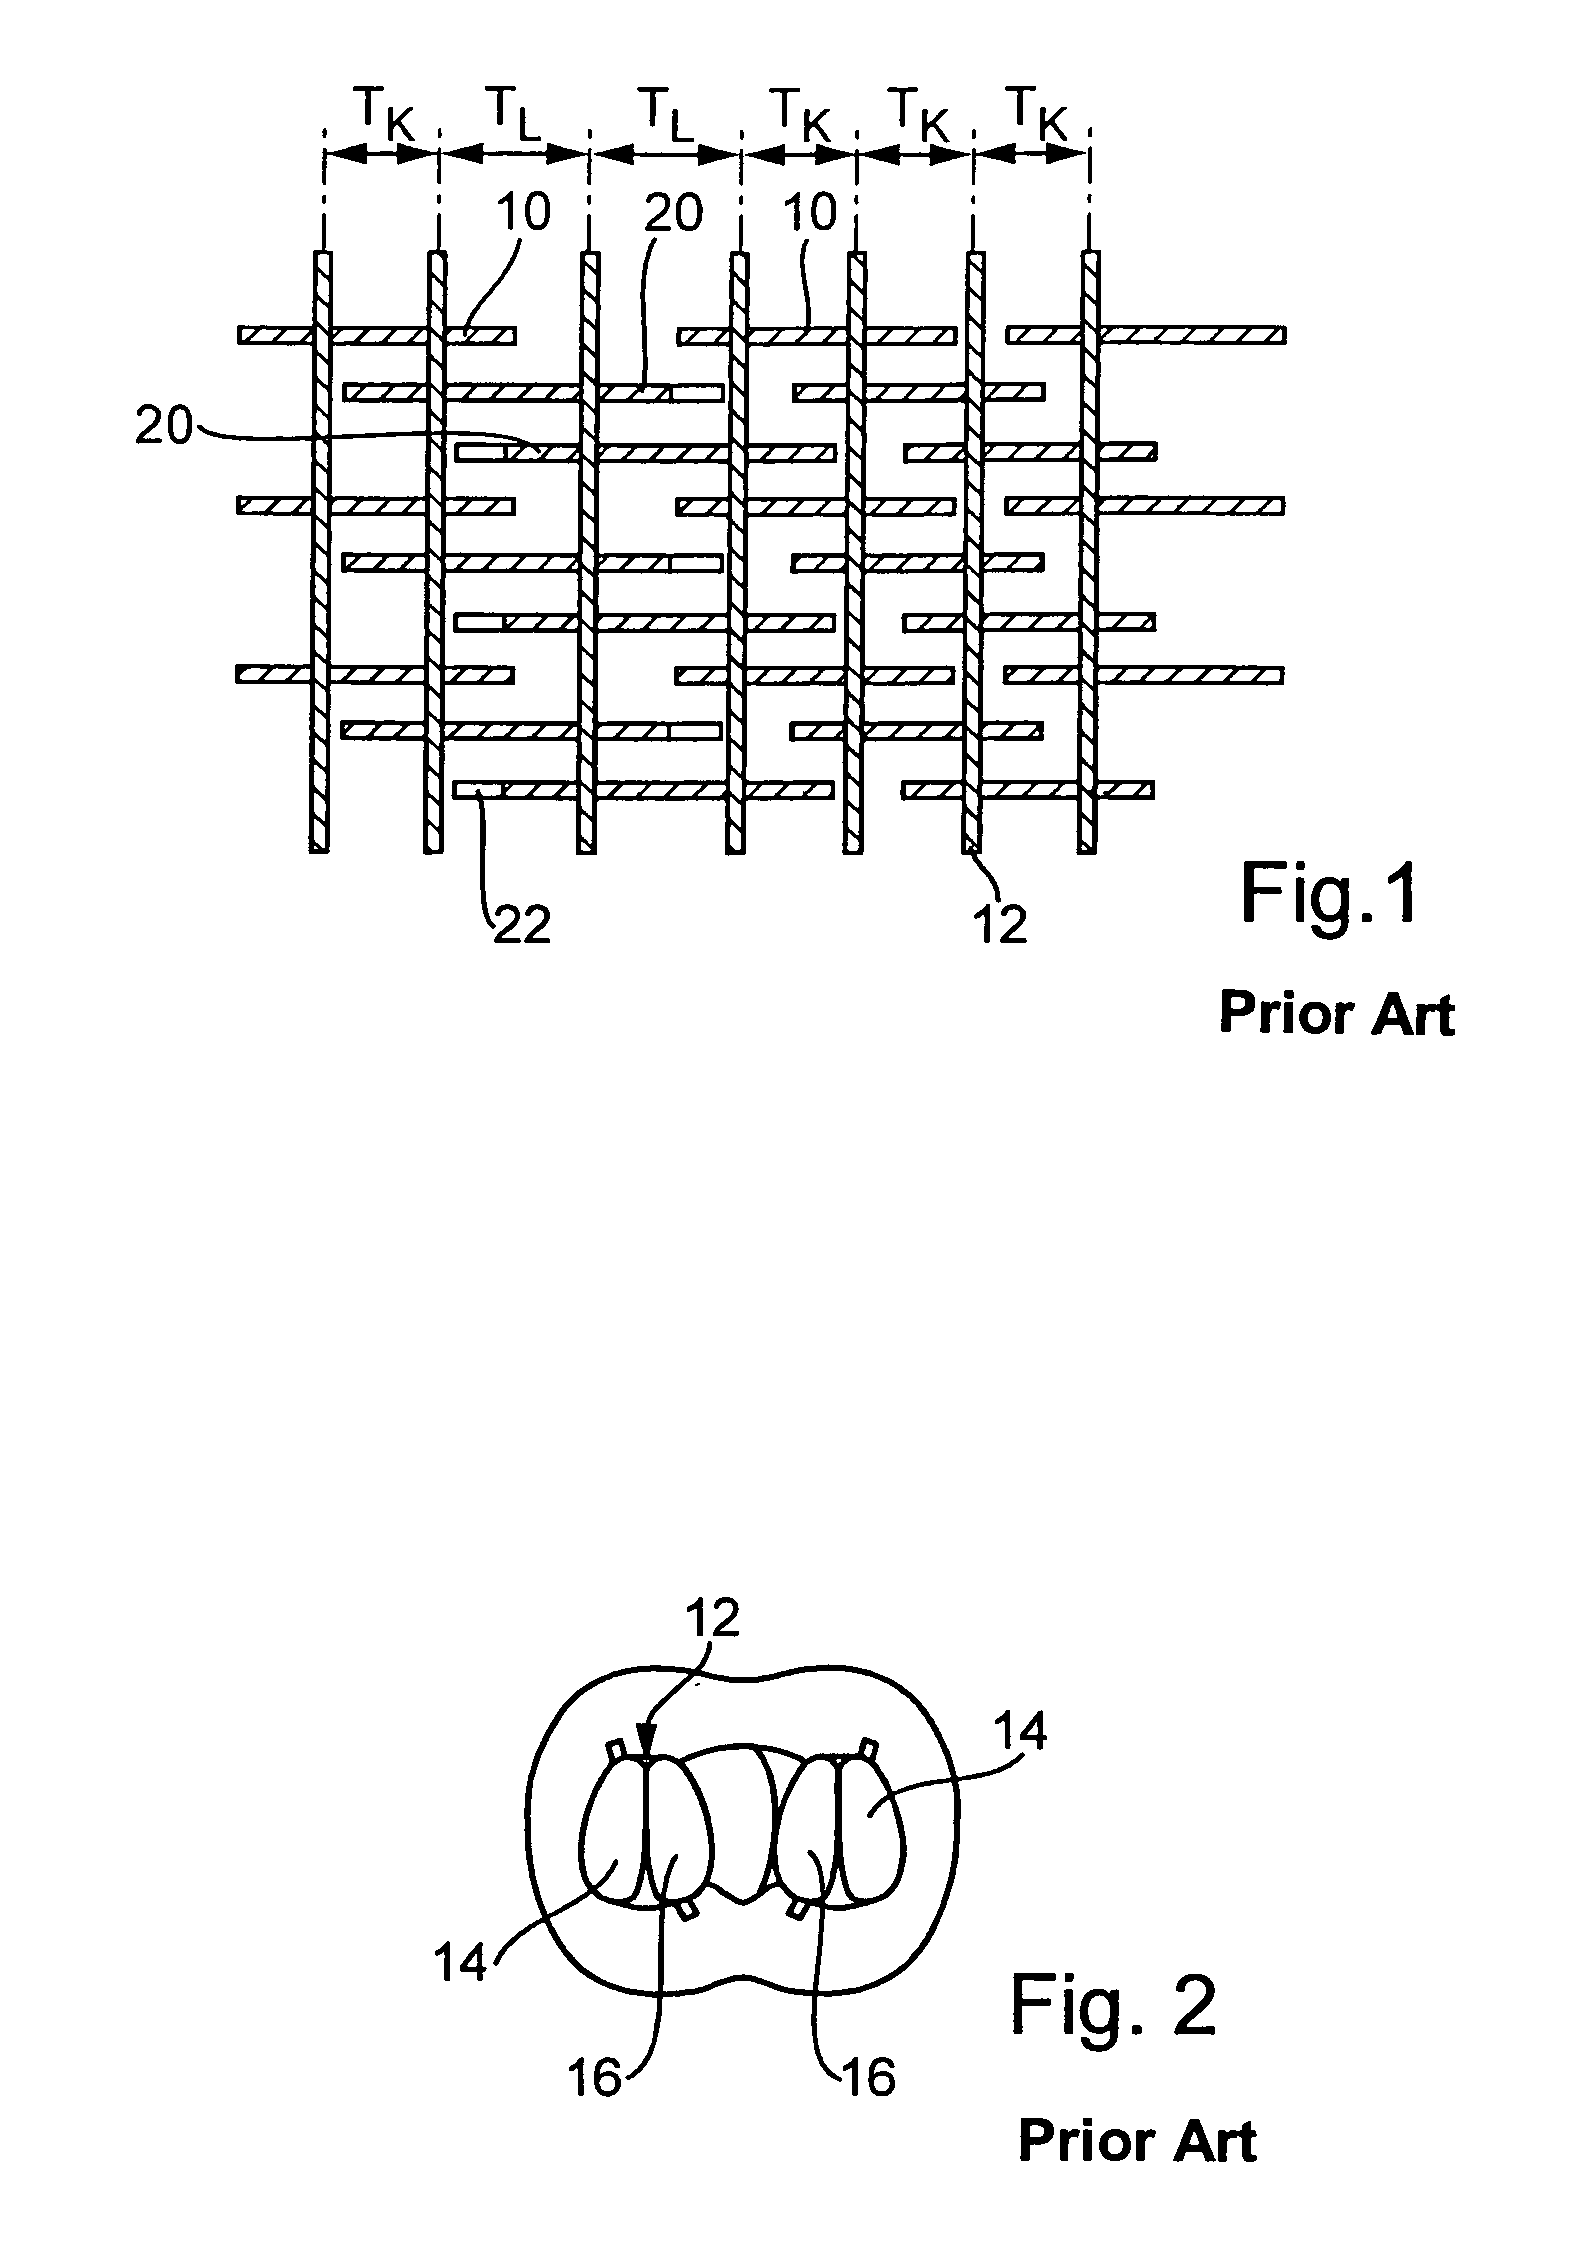 Plate-link chain for a continuously variable transmission